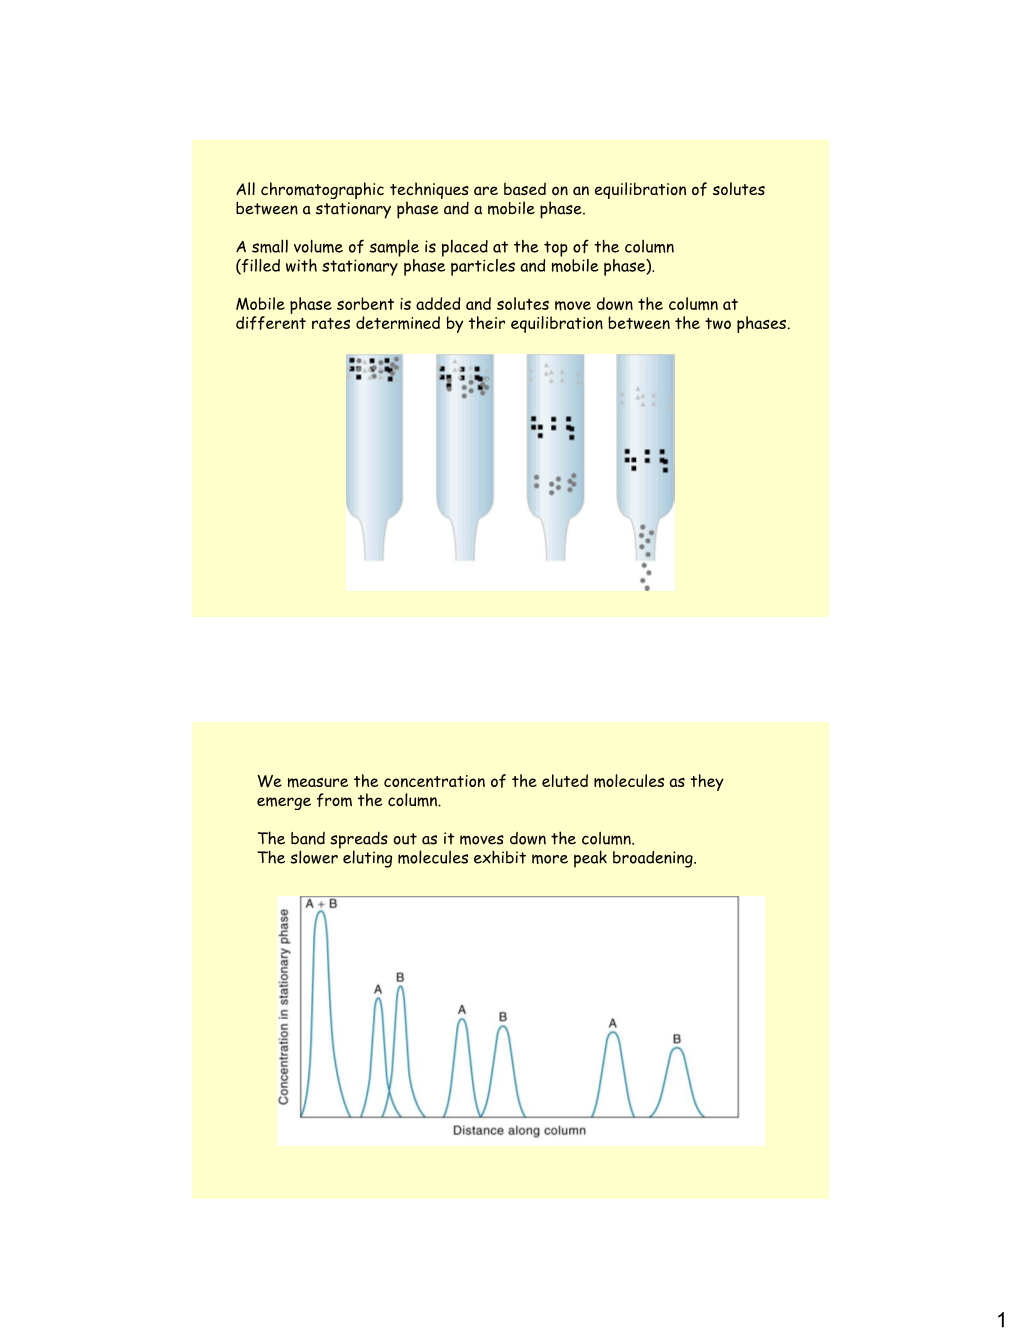 Chromatographic Techniques Are Based on an Equilibration of Solutes Between a Stationary Phase and a Mobile Phase